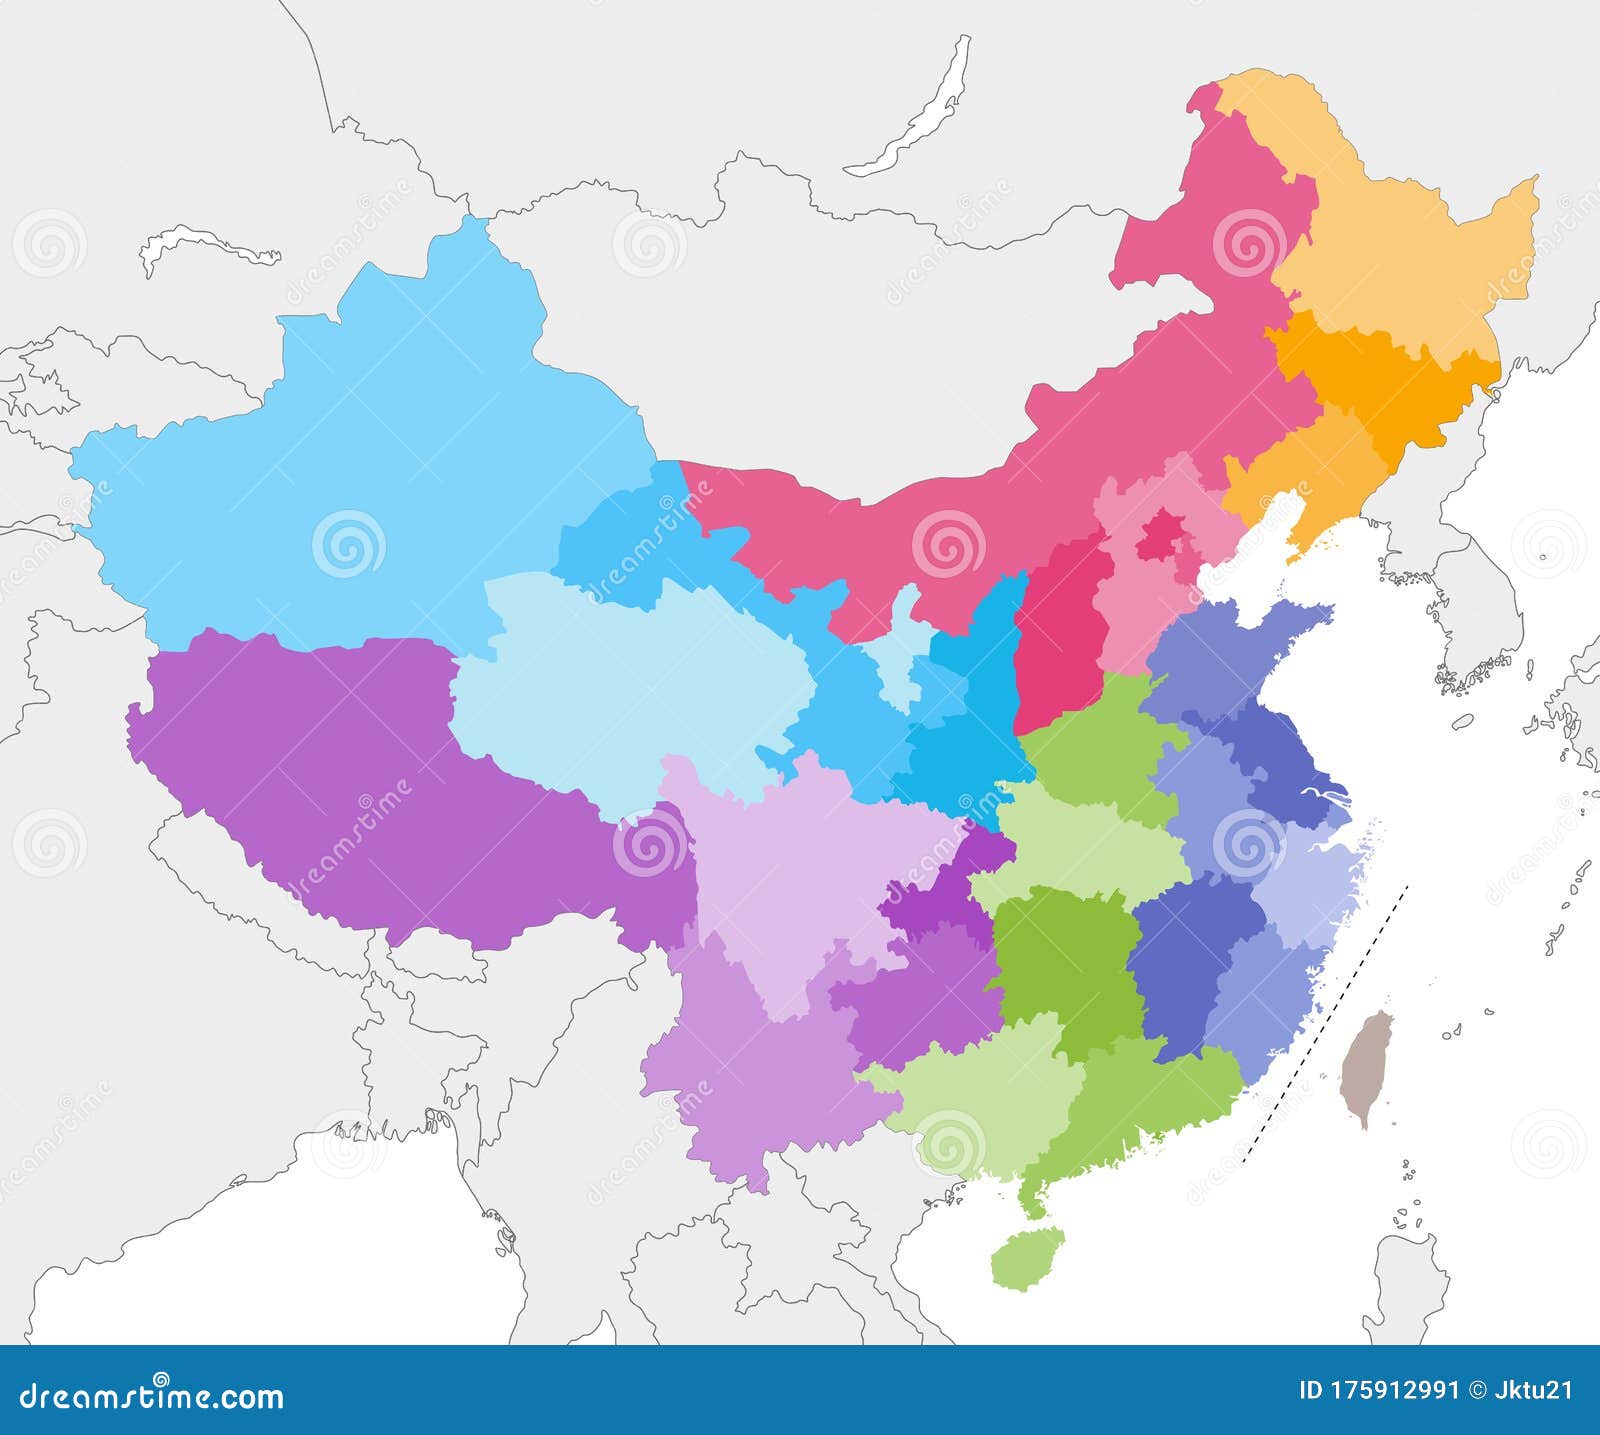  map of china provinces colored by regions with neighbouring countries and territories